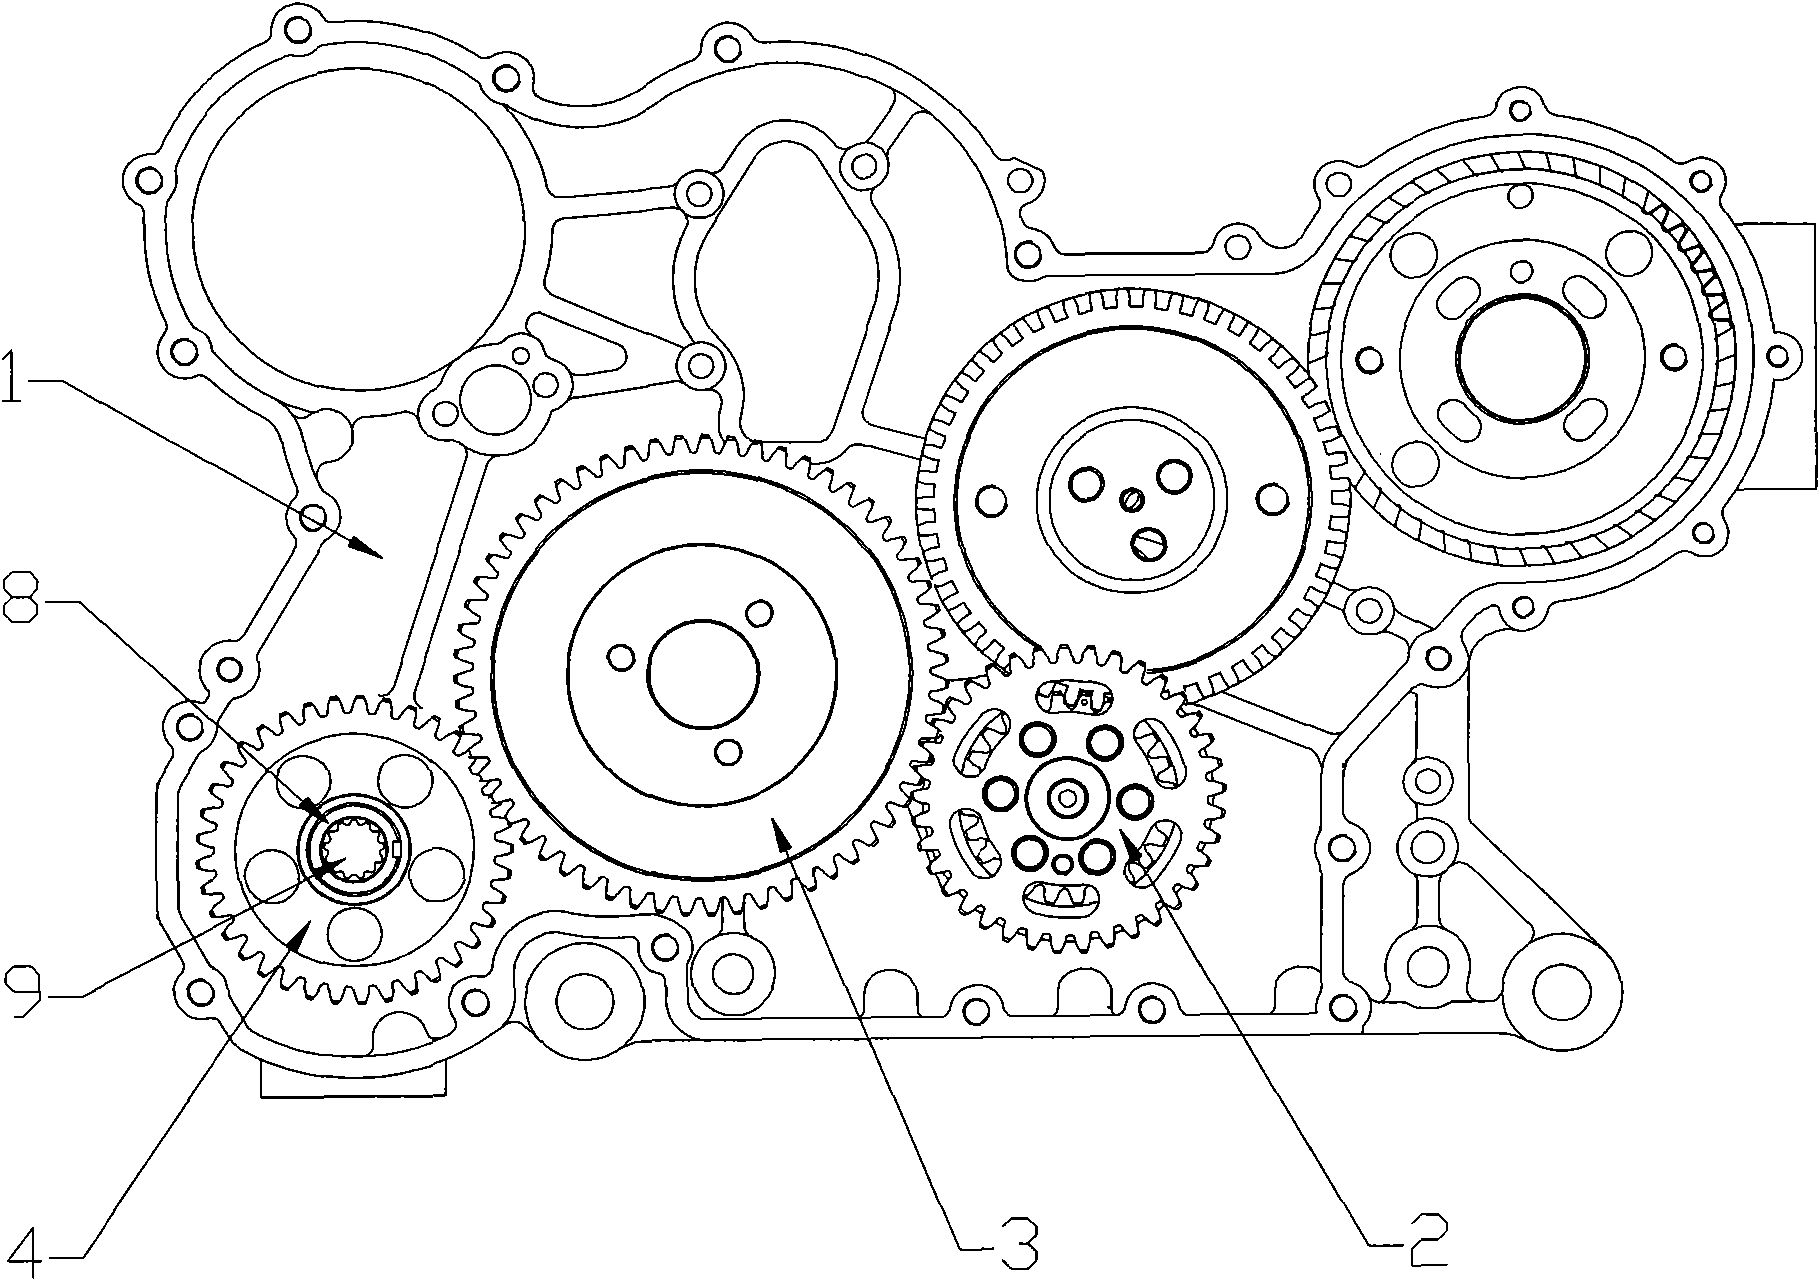 Front-end high-power output structure for engine